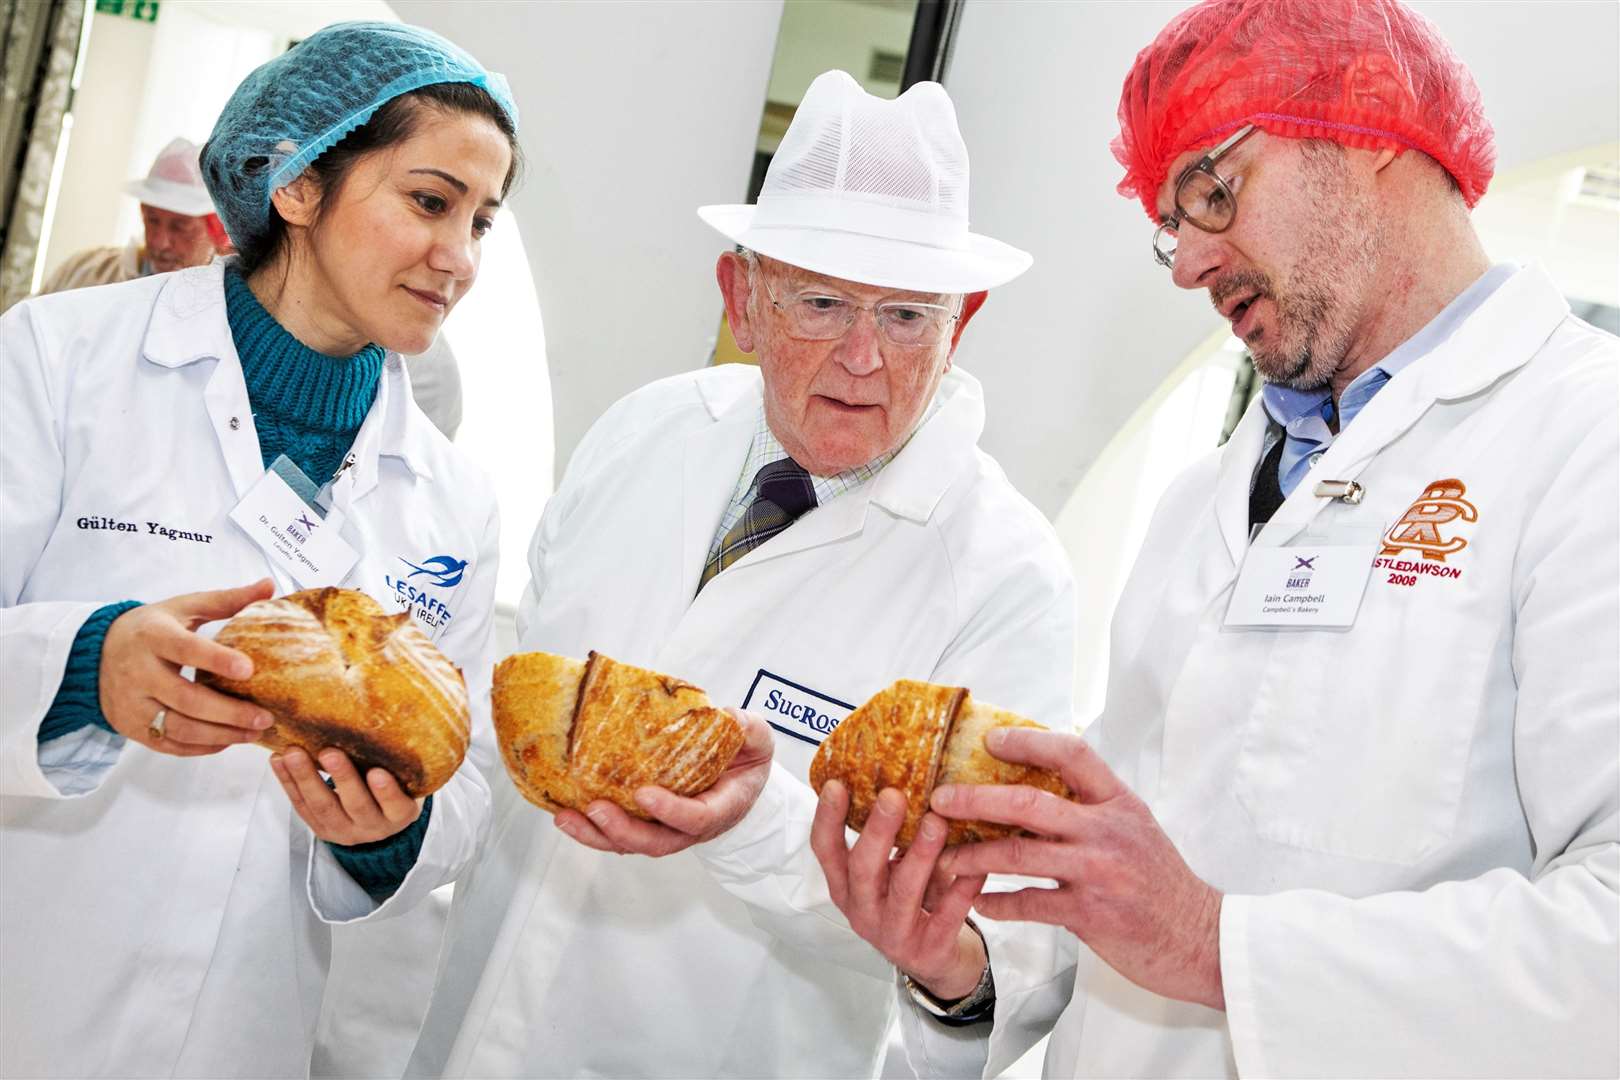 Judging for Scottish Baker of The Year 2023/24 takes place in Dunfermline. This year sees a bumper crop of entries of nearly 650 ‘brilliant bakes’ from 70 bakers across Scotland.